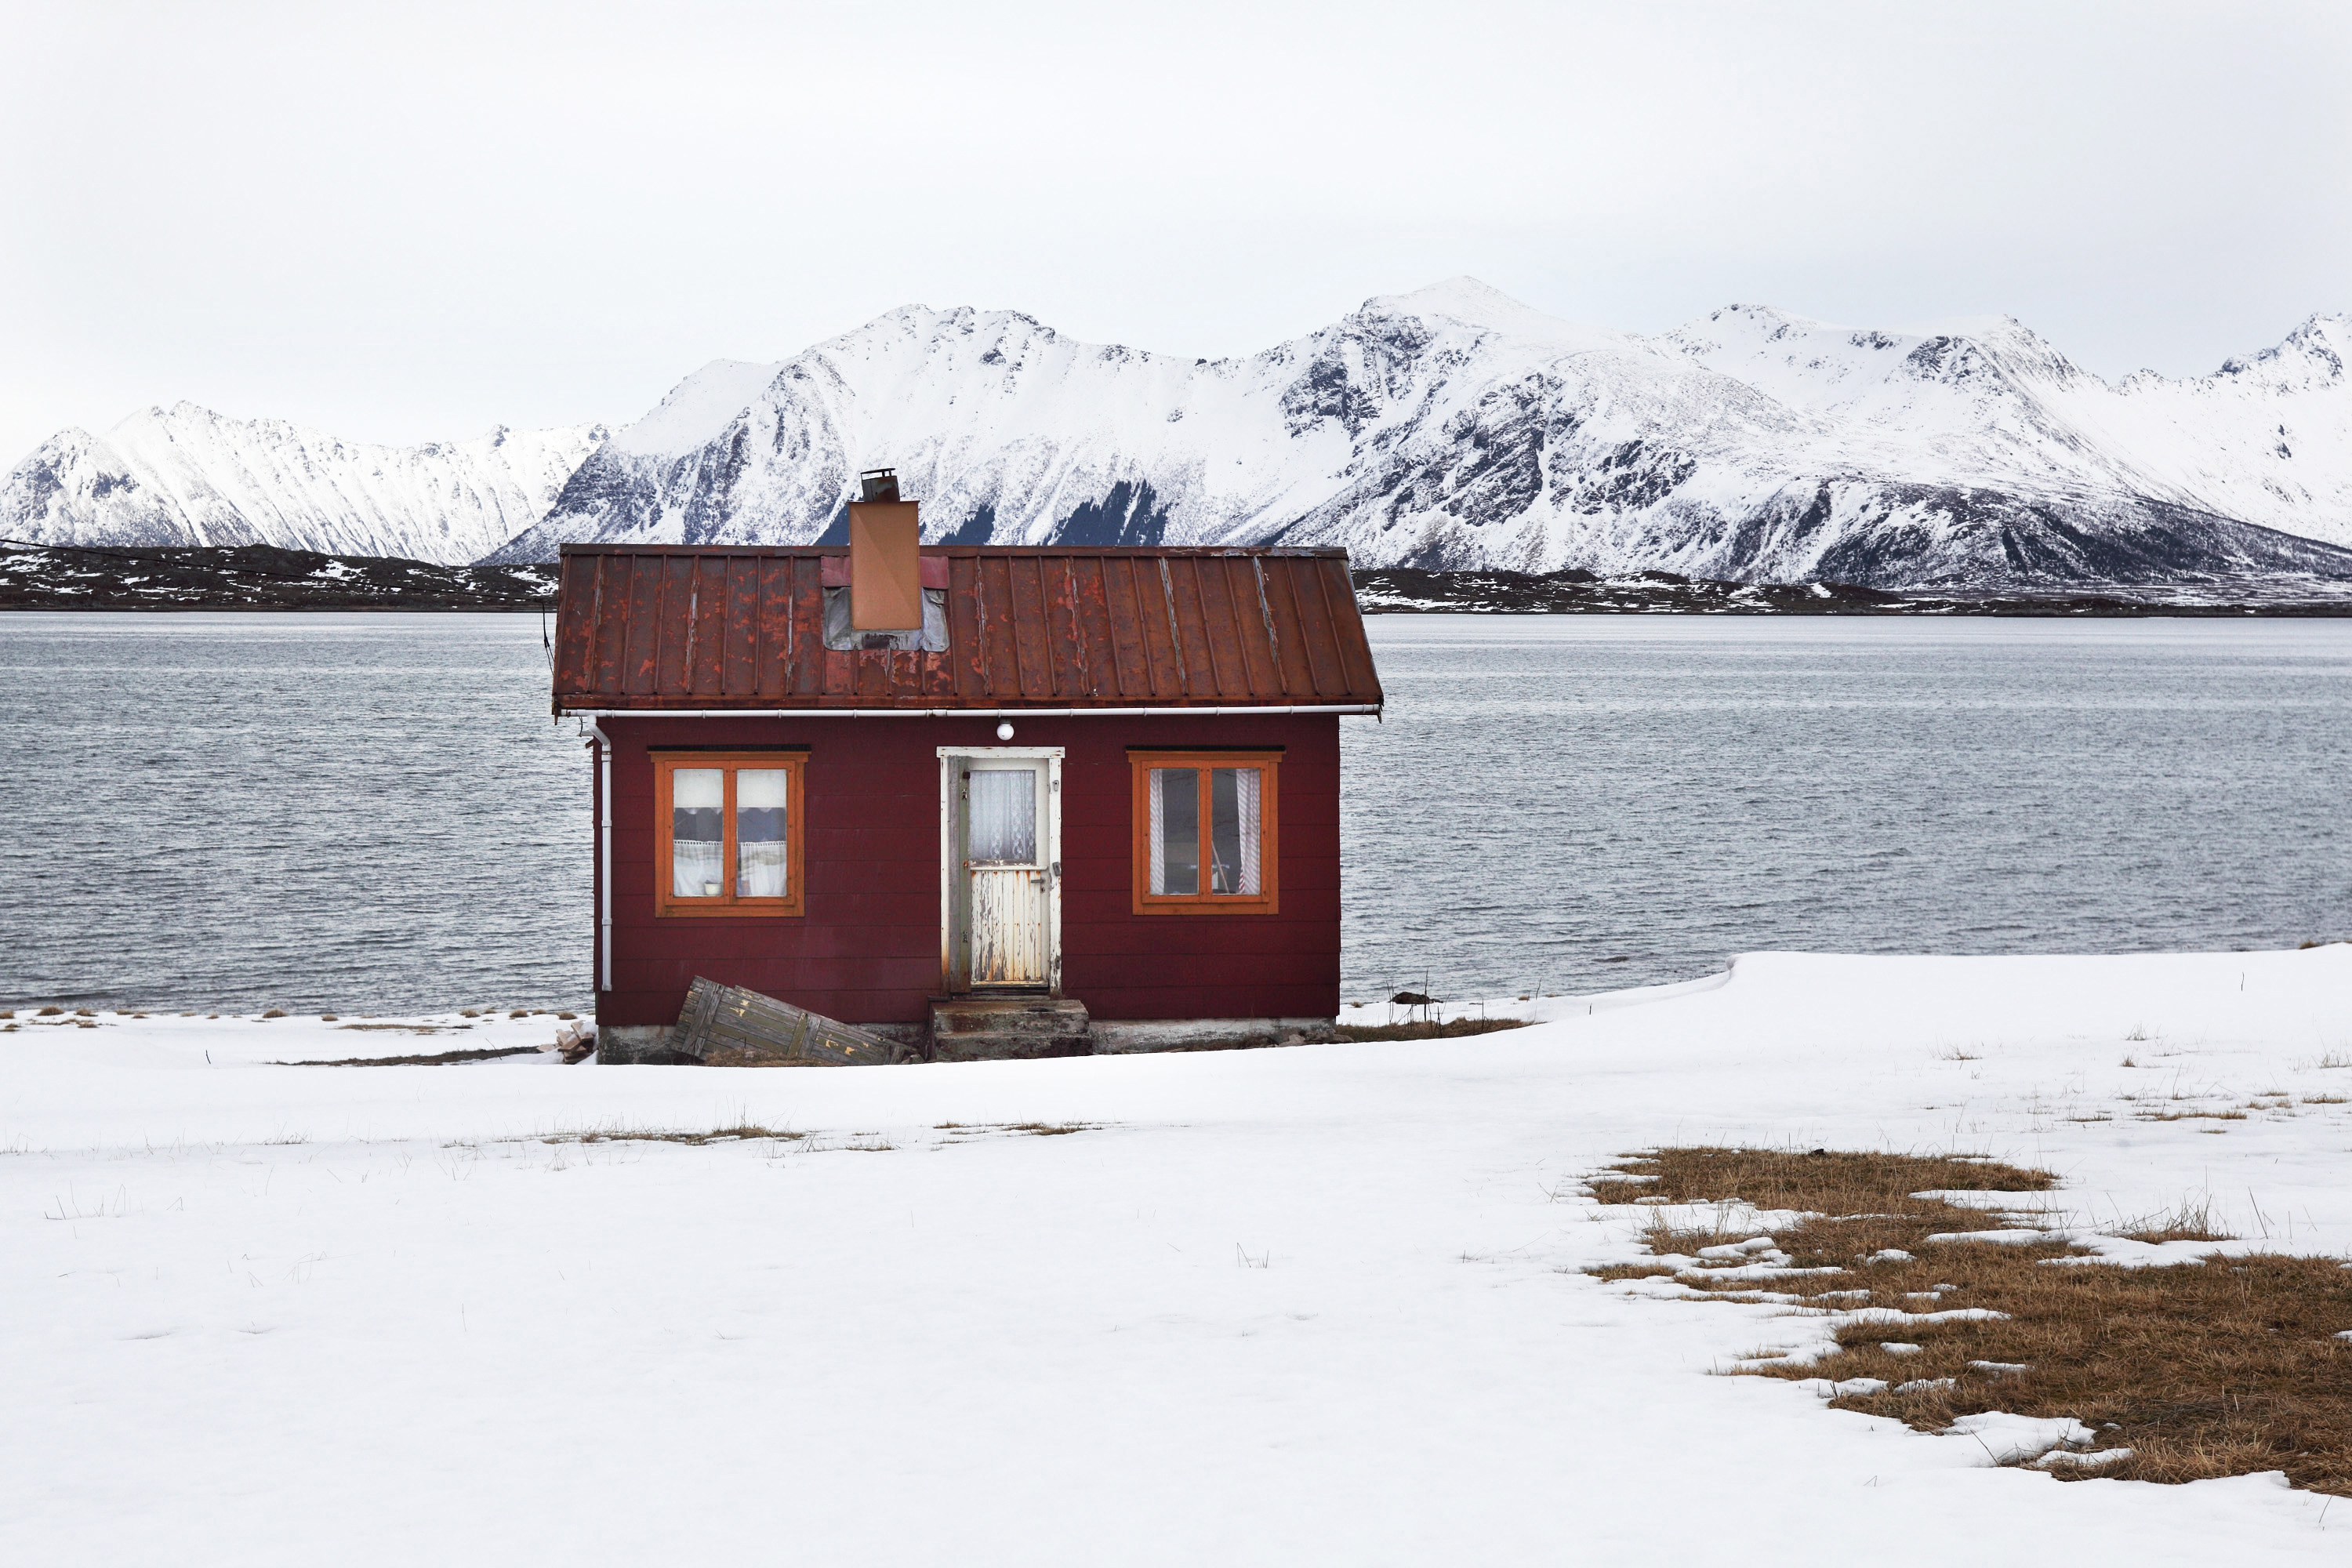 A 2009 photo of a house on the island of Lofoten, Norway. (Heidi Wideroe / Bloomberg)